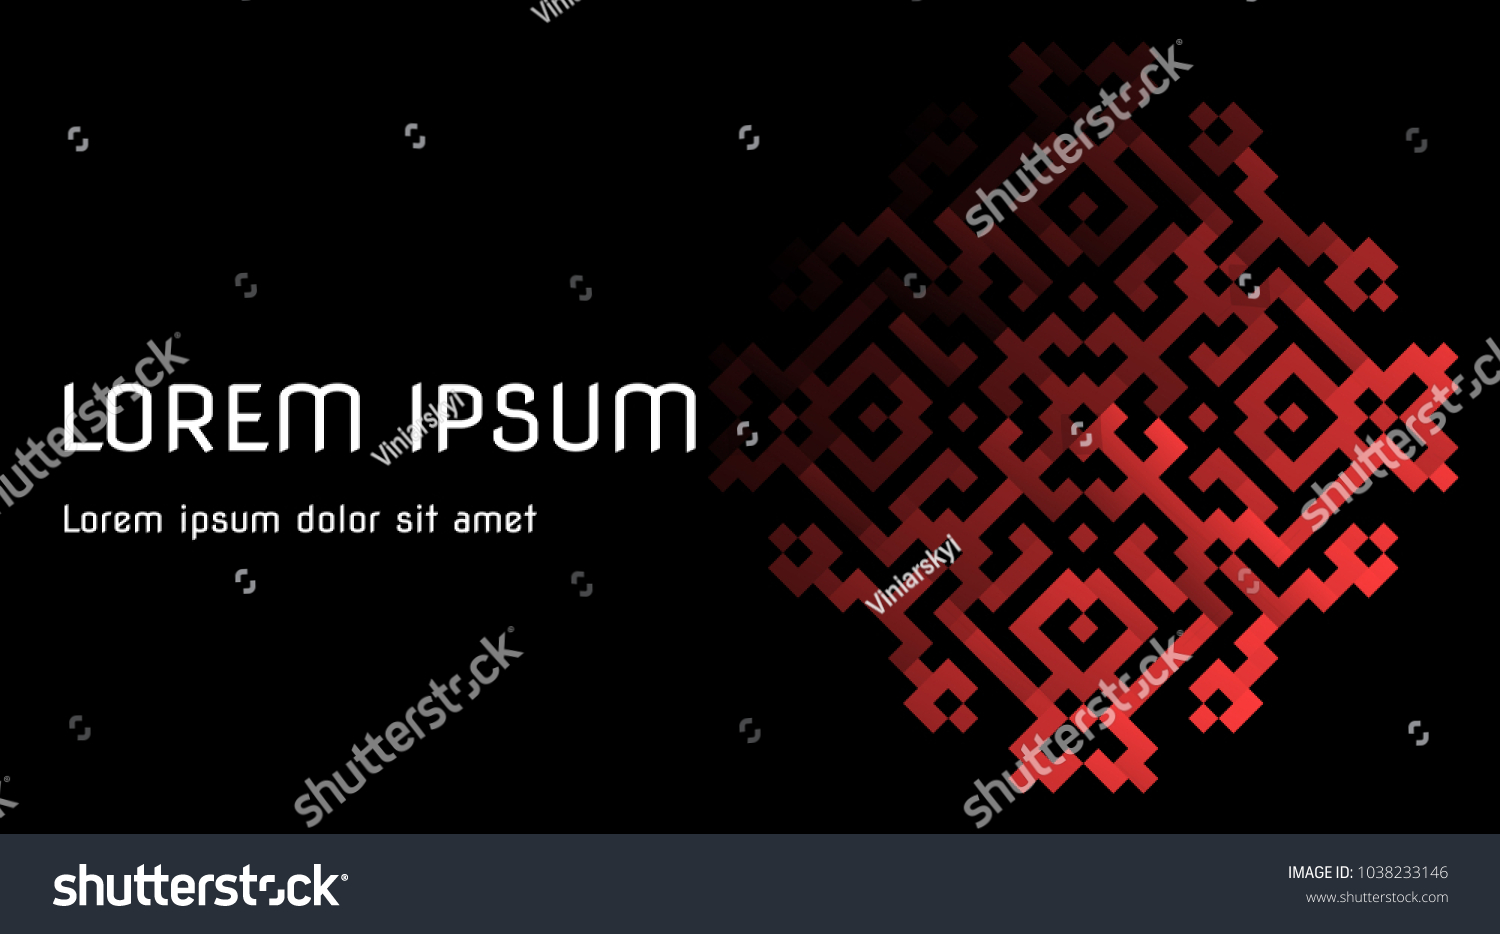 SVG of vector background for business cards, invitations and presentations. diamond-shaped ukrainian ornament from the right. svg